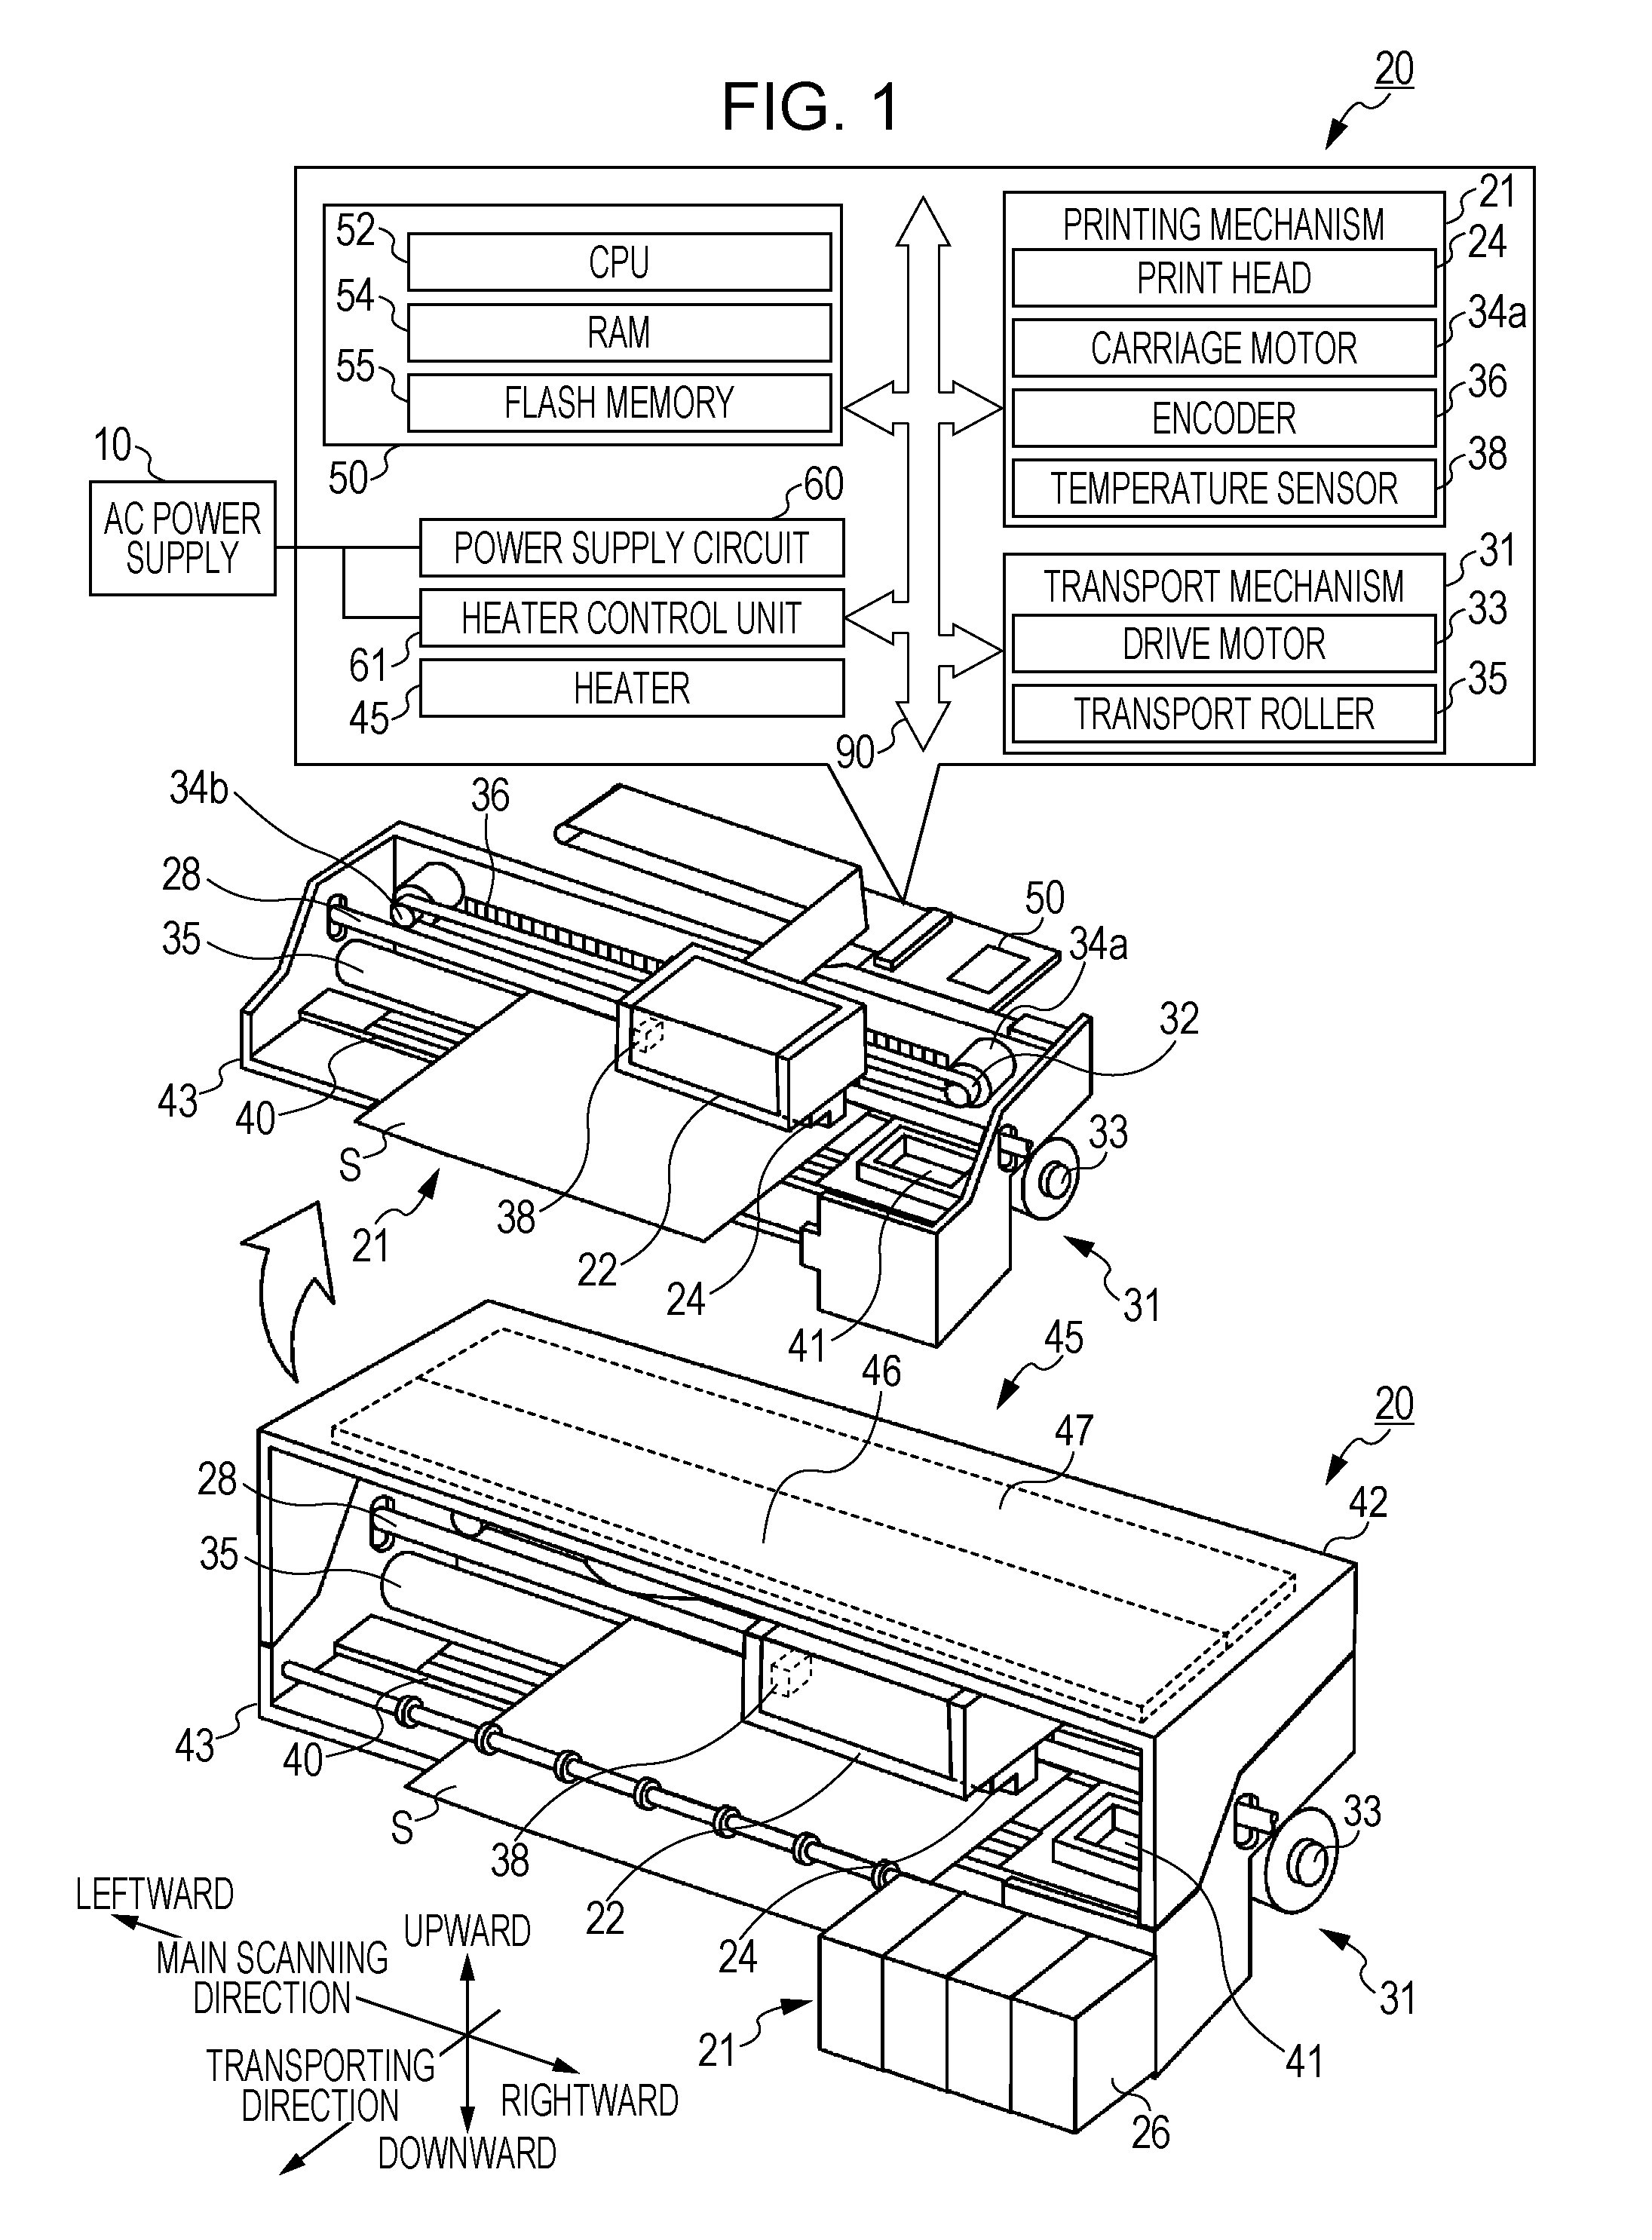 Load control device, image forming apparatus, and method of controlling load